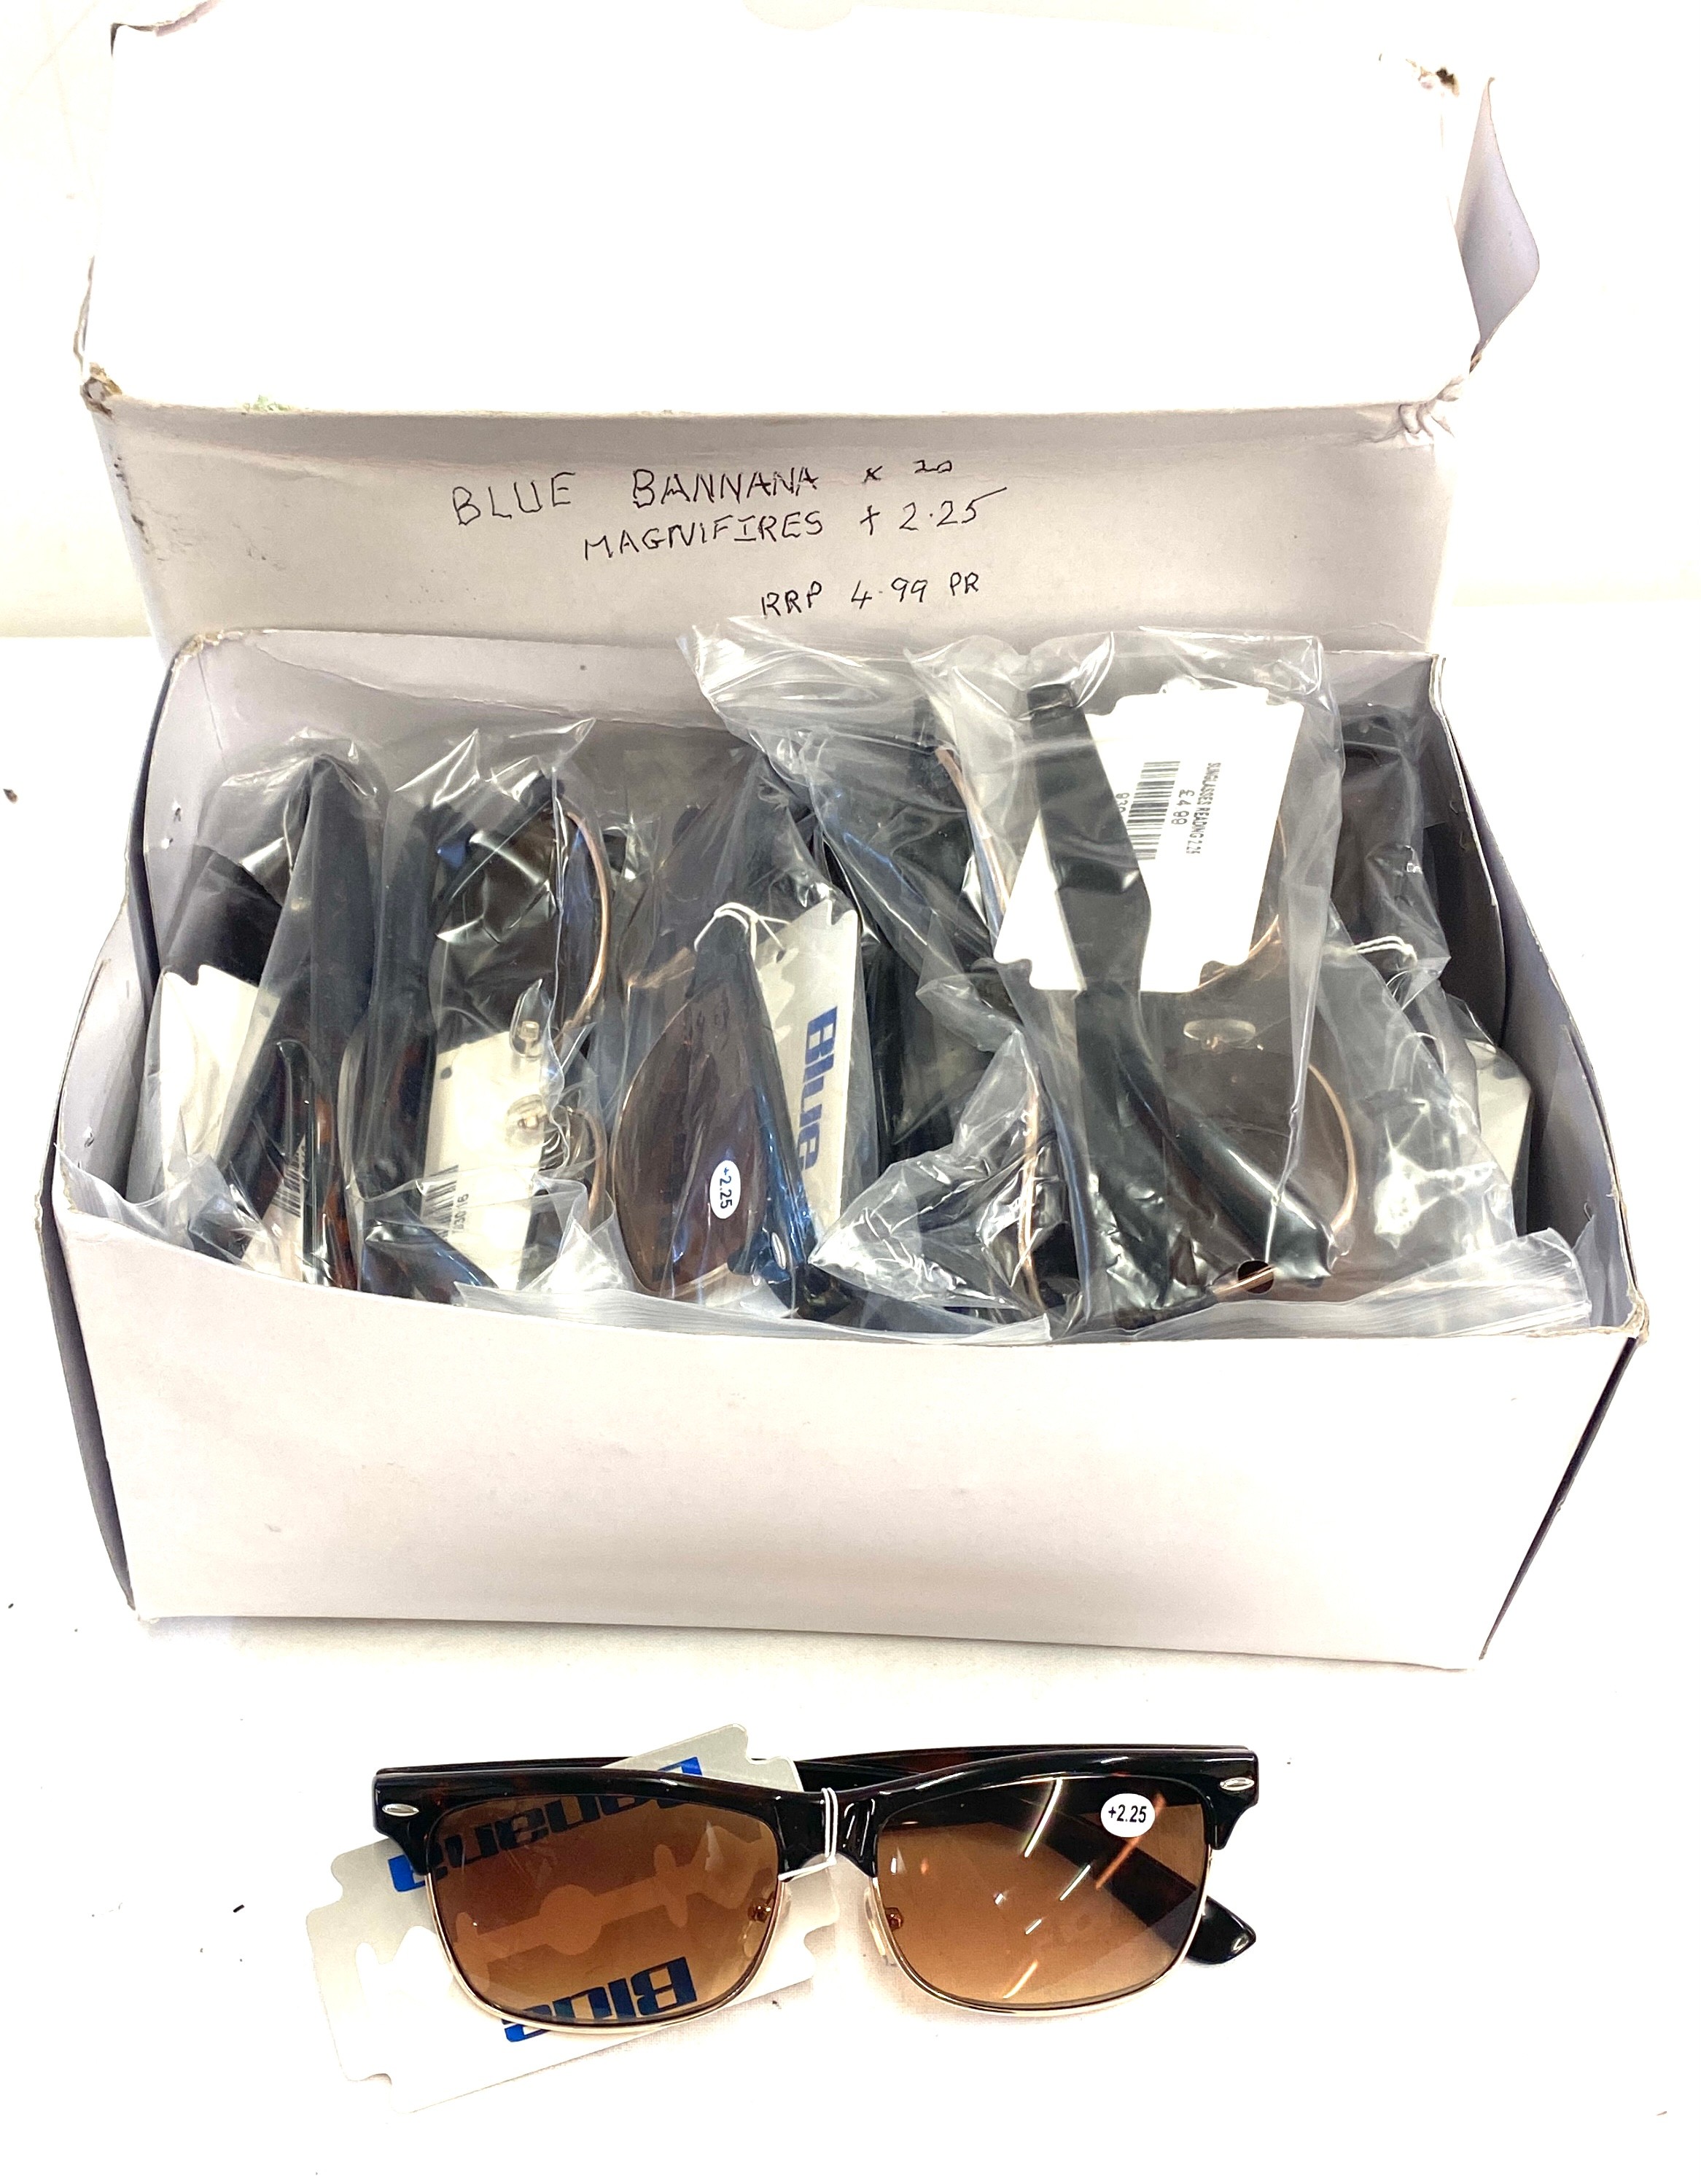 Selection of new in packaging Blue banana magnifying sunglasses